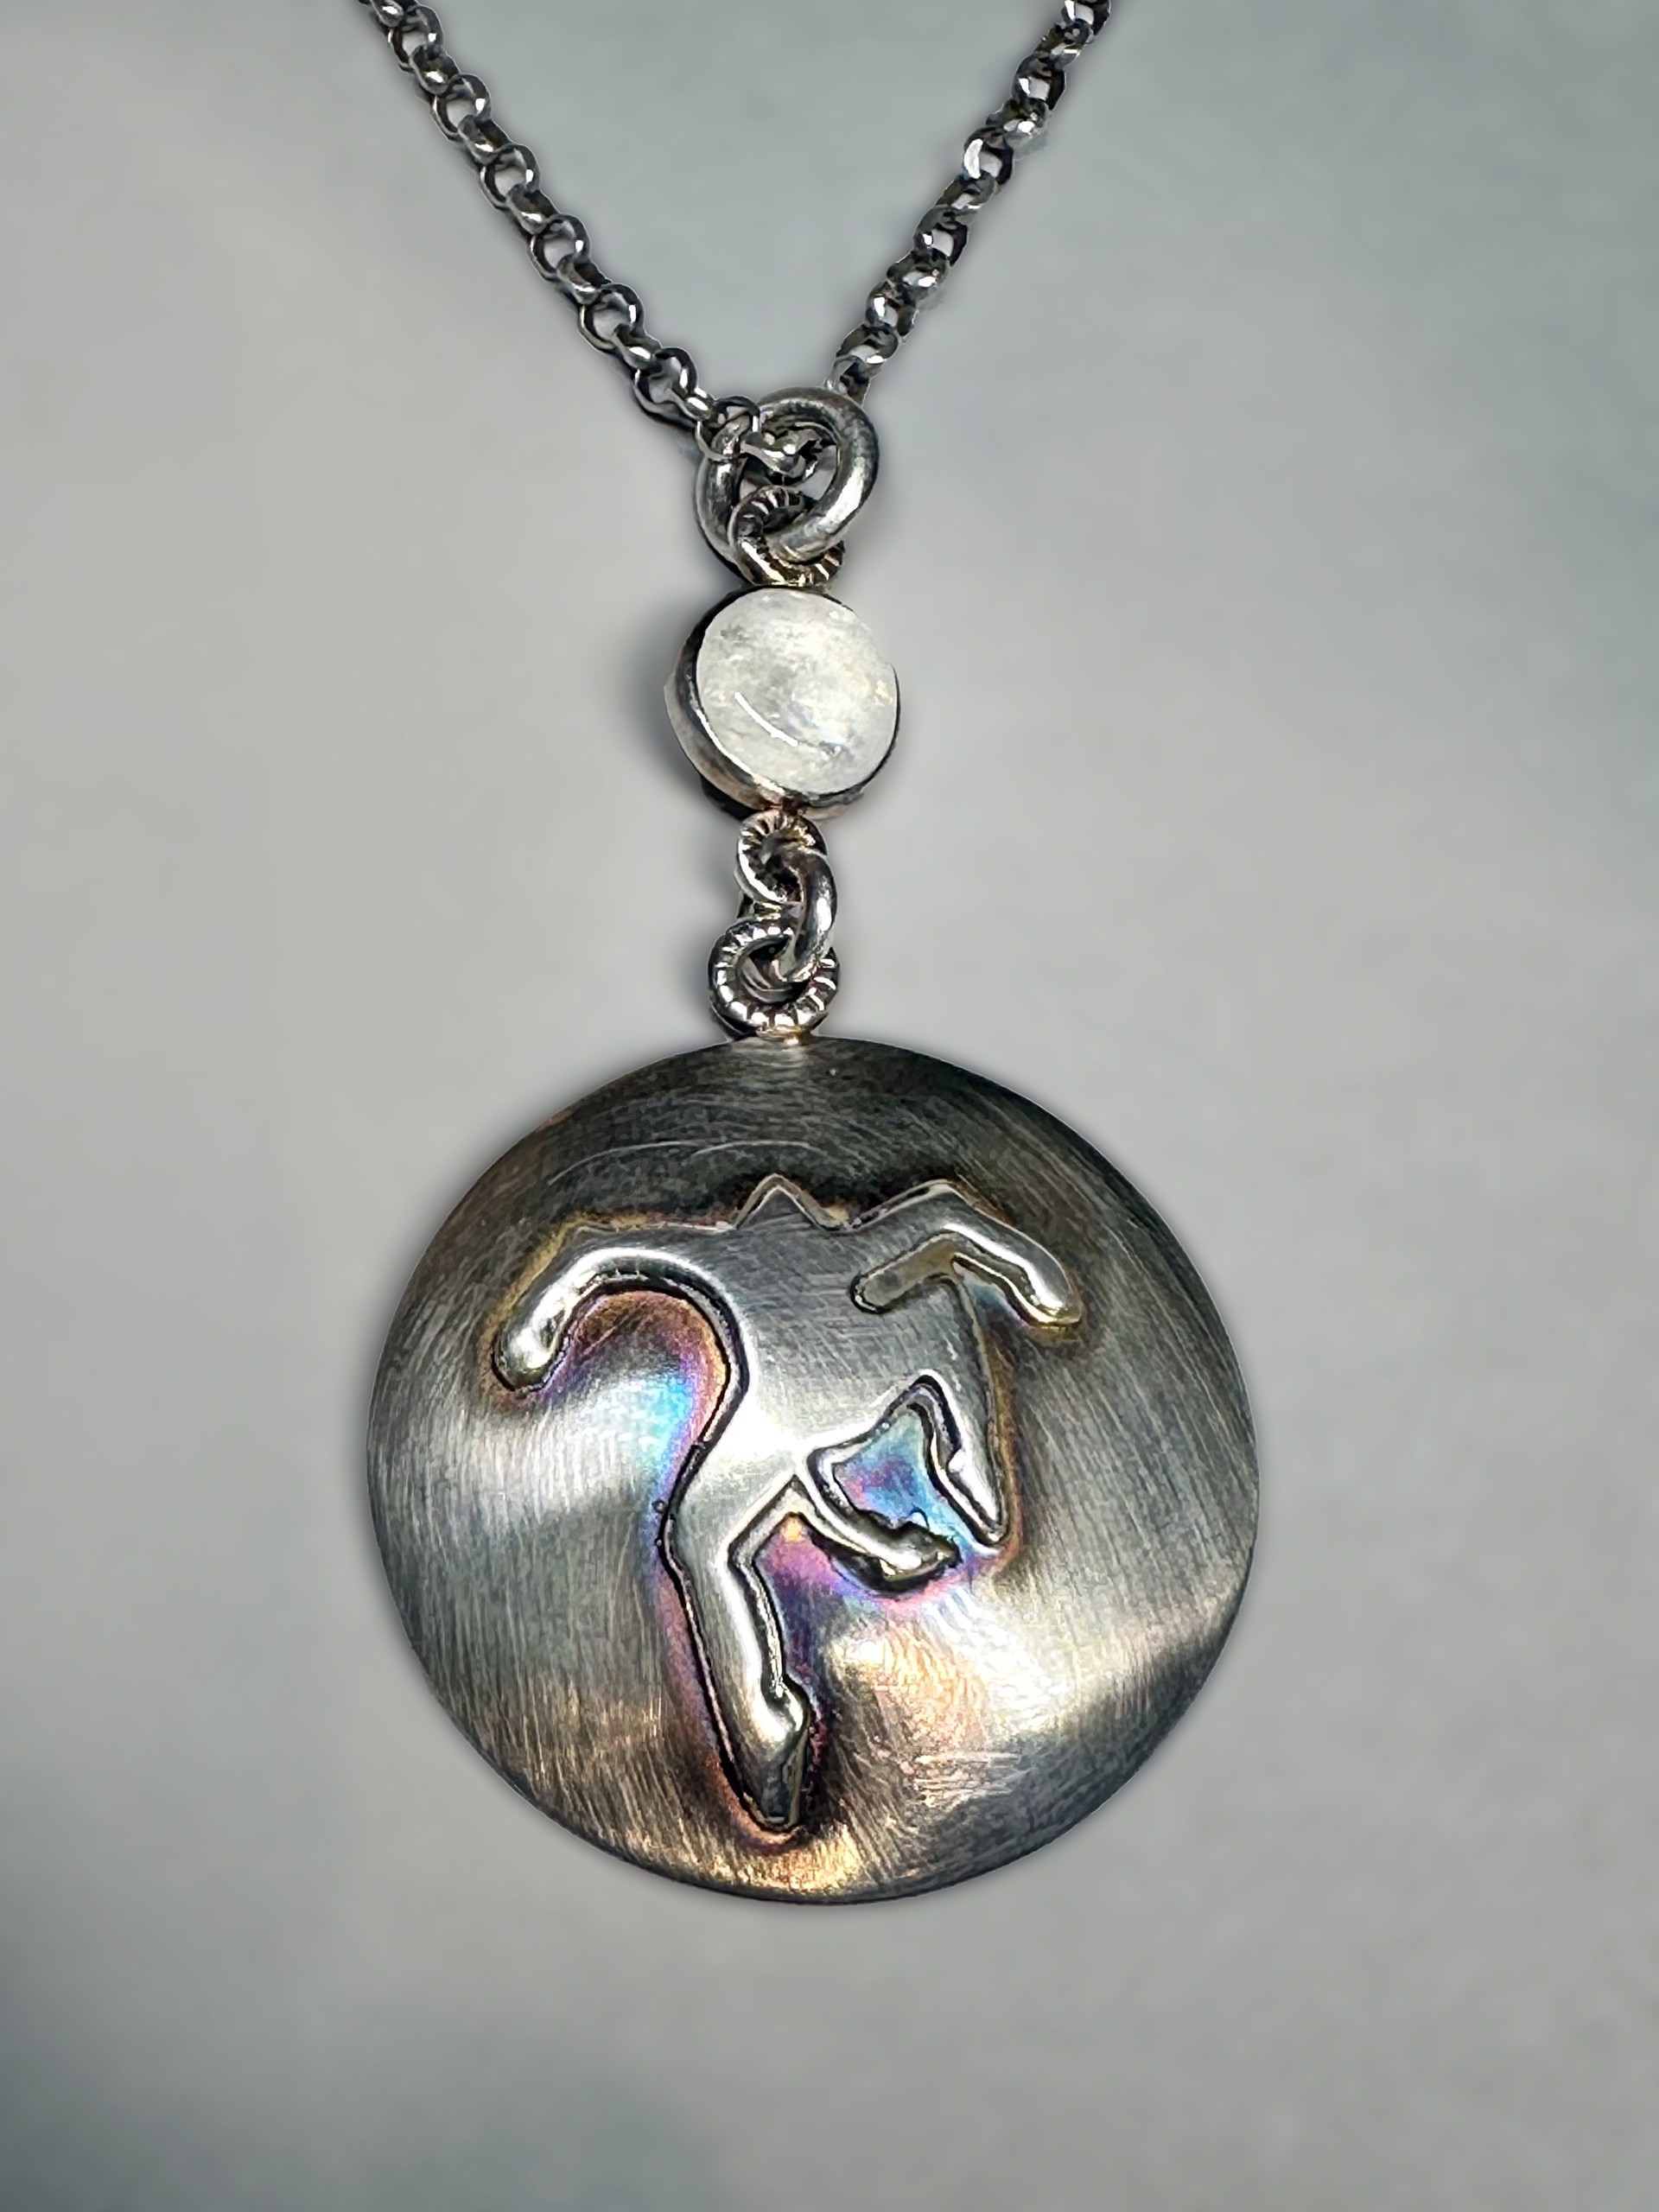 Sterling Silver Pendant with Dancing Pan by Tabor Porter